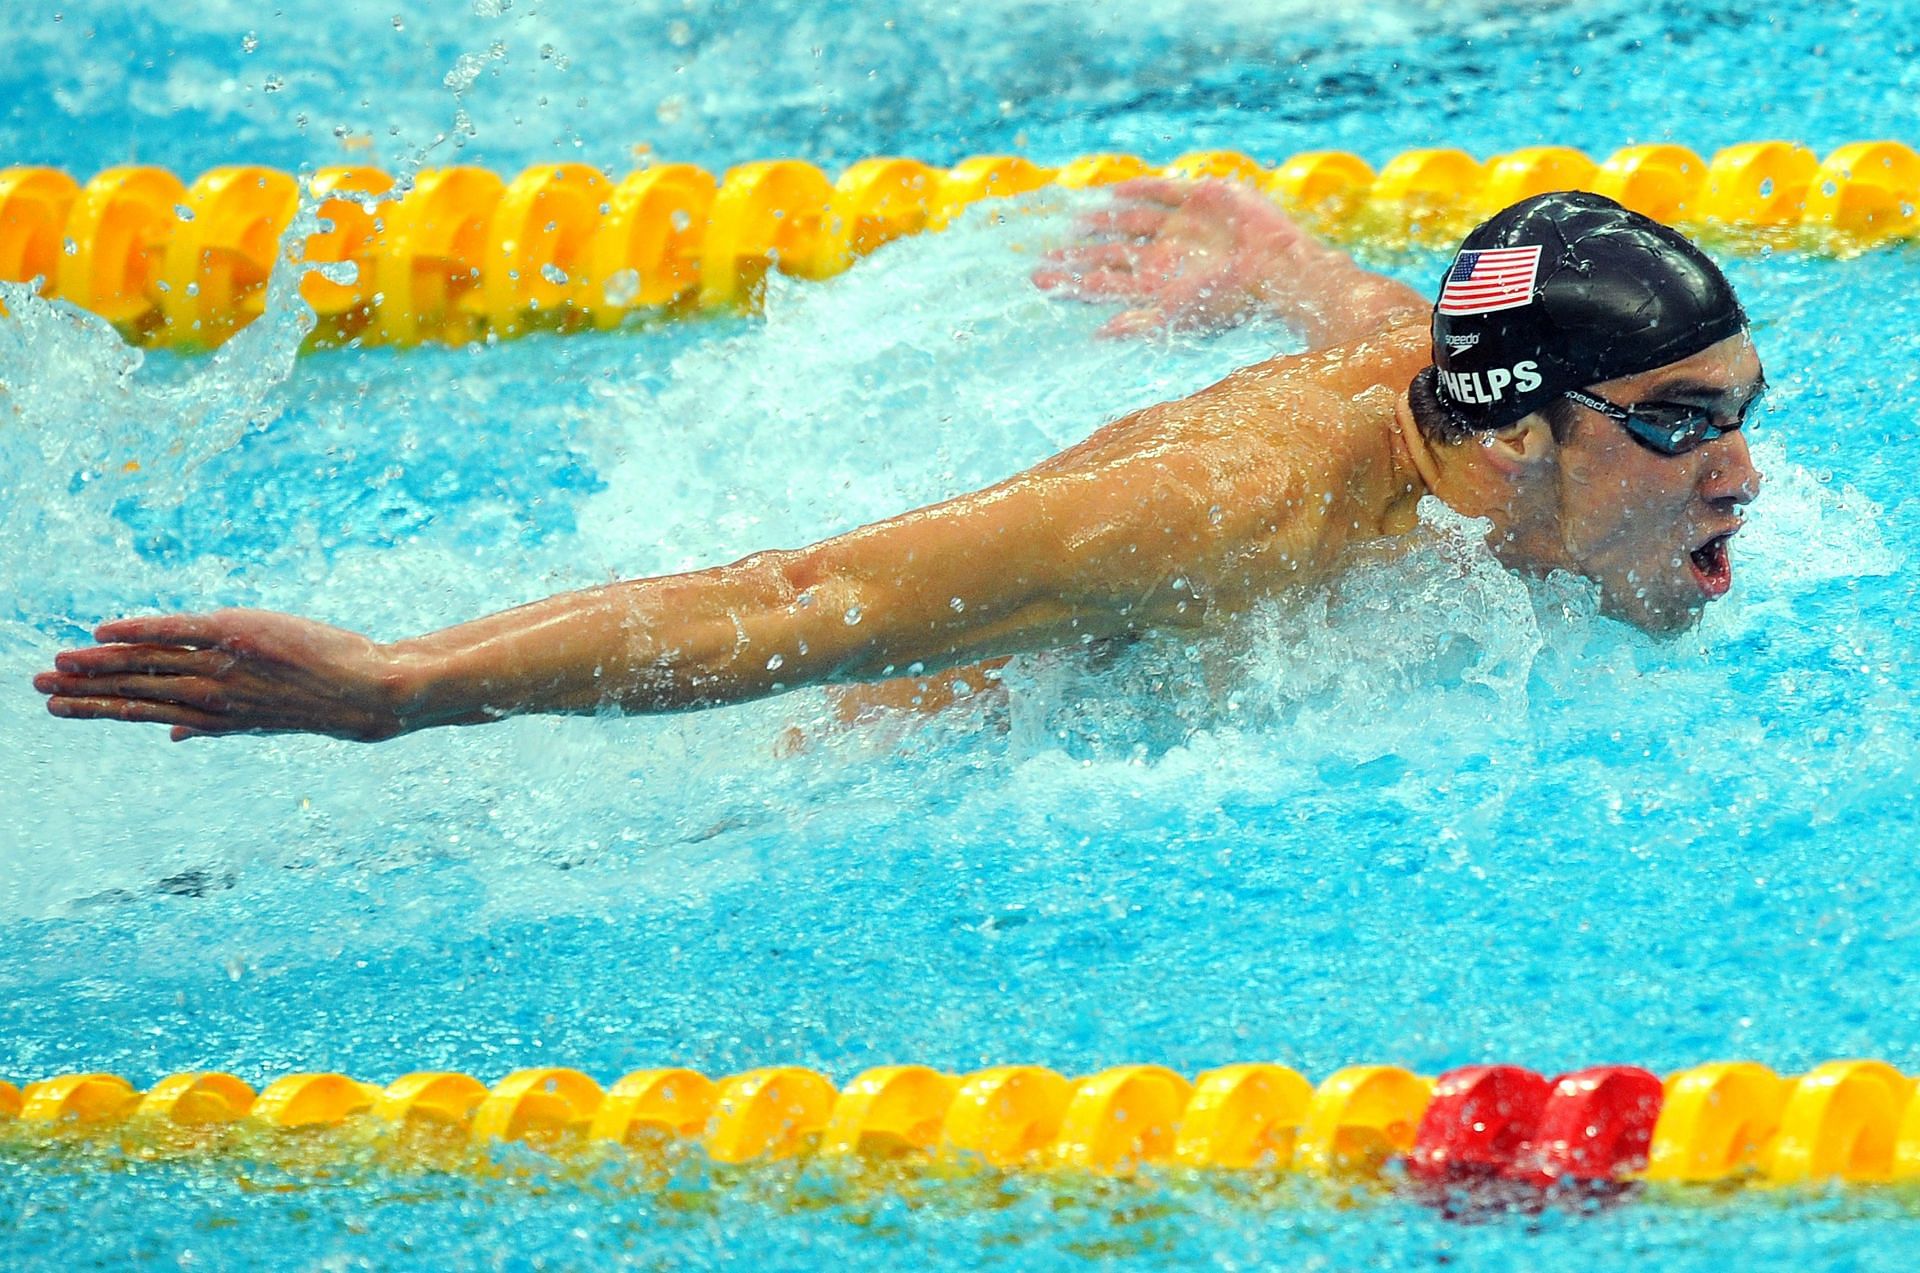 Michael Phelps won eight gold medals at the Beijing Olympics